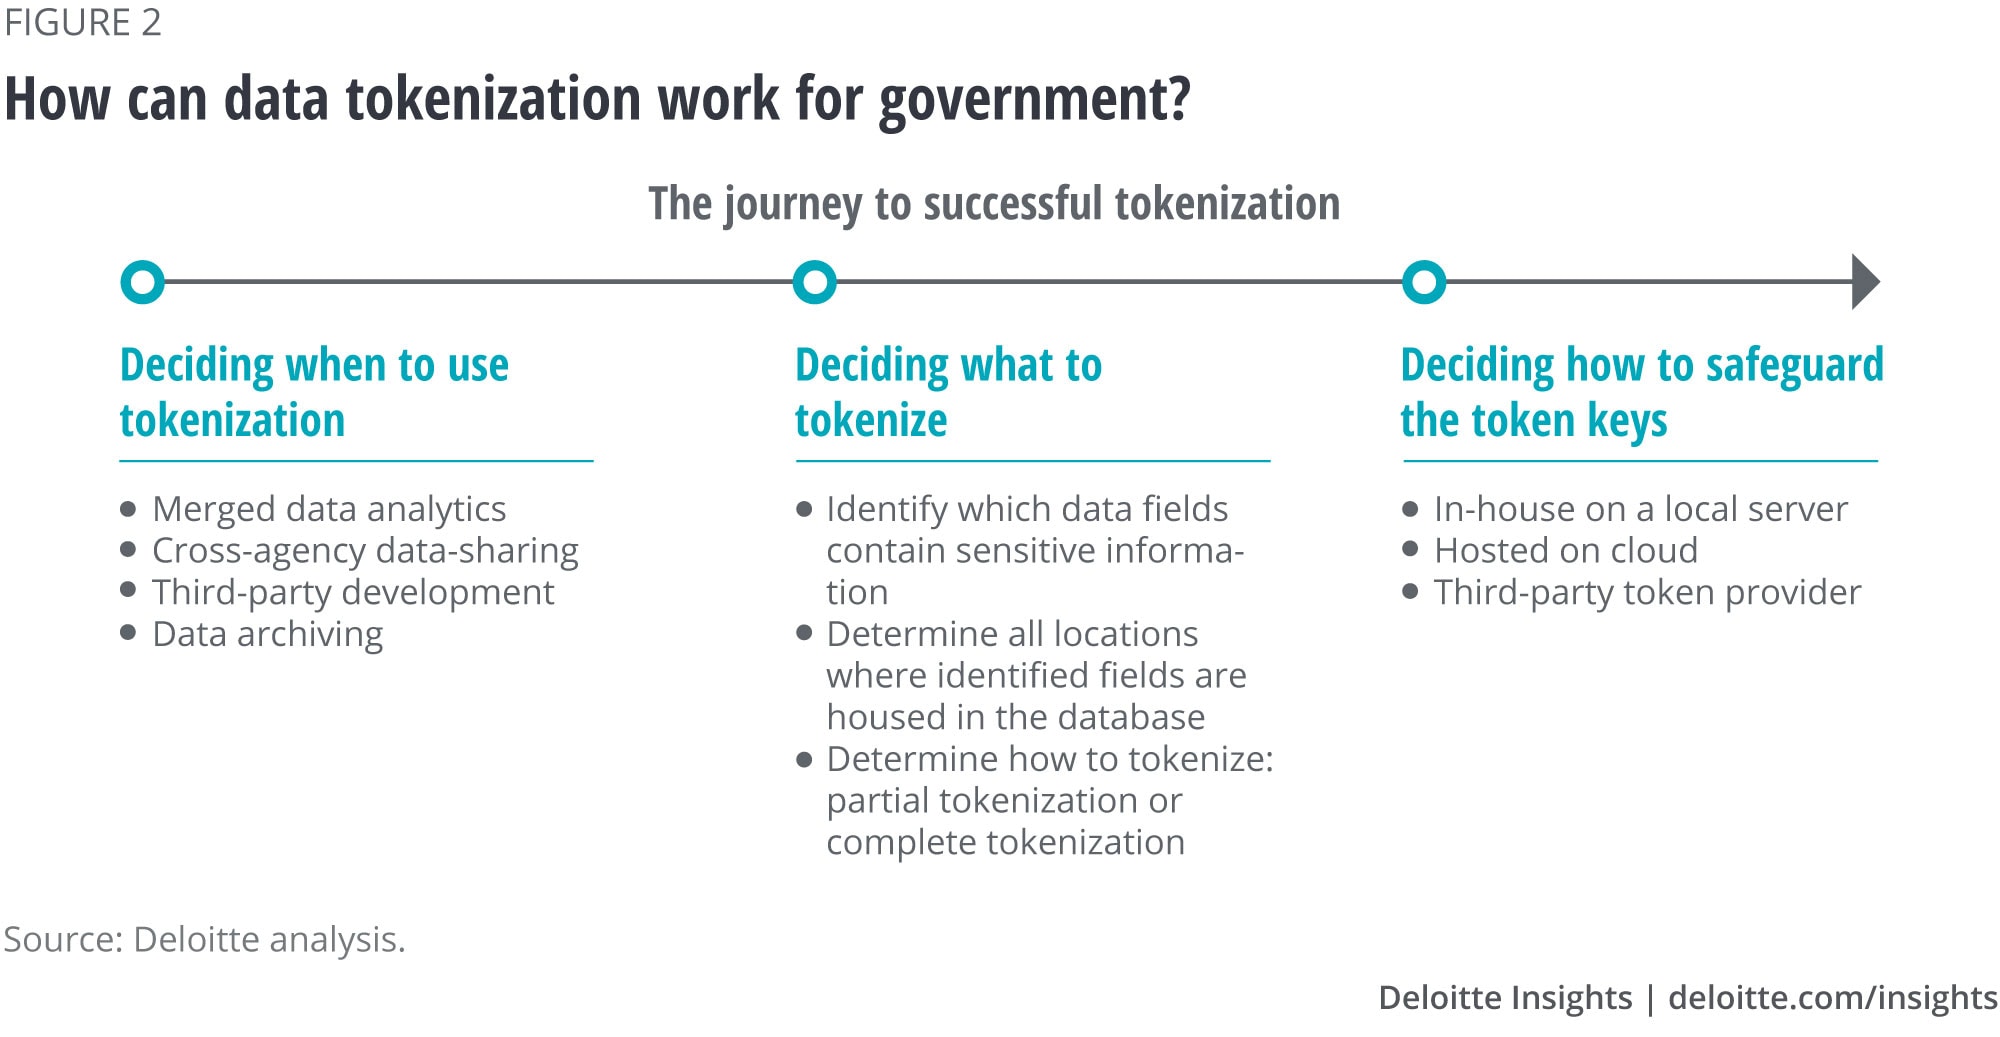 How can data tokenization work for government?